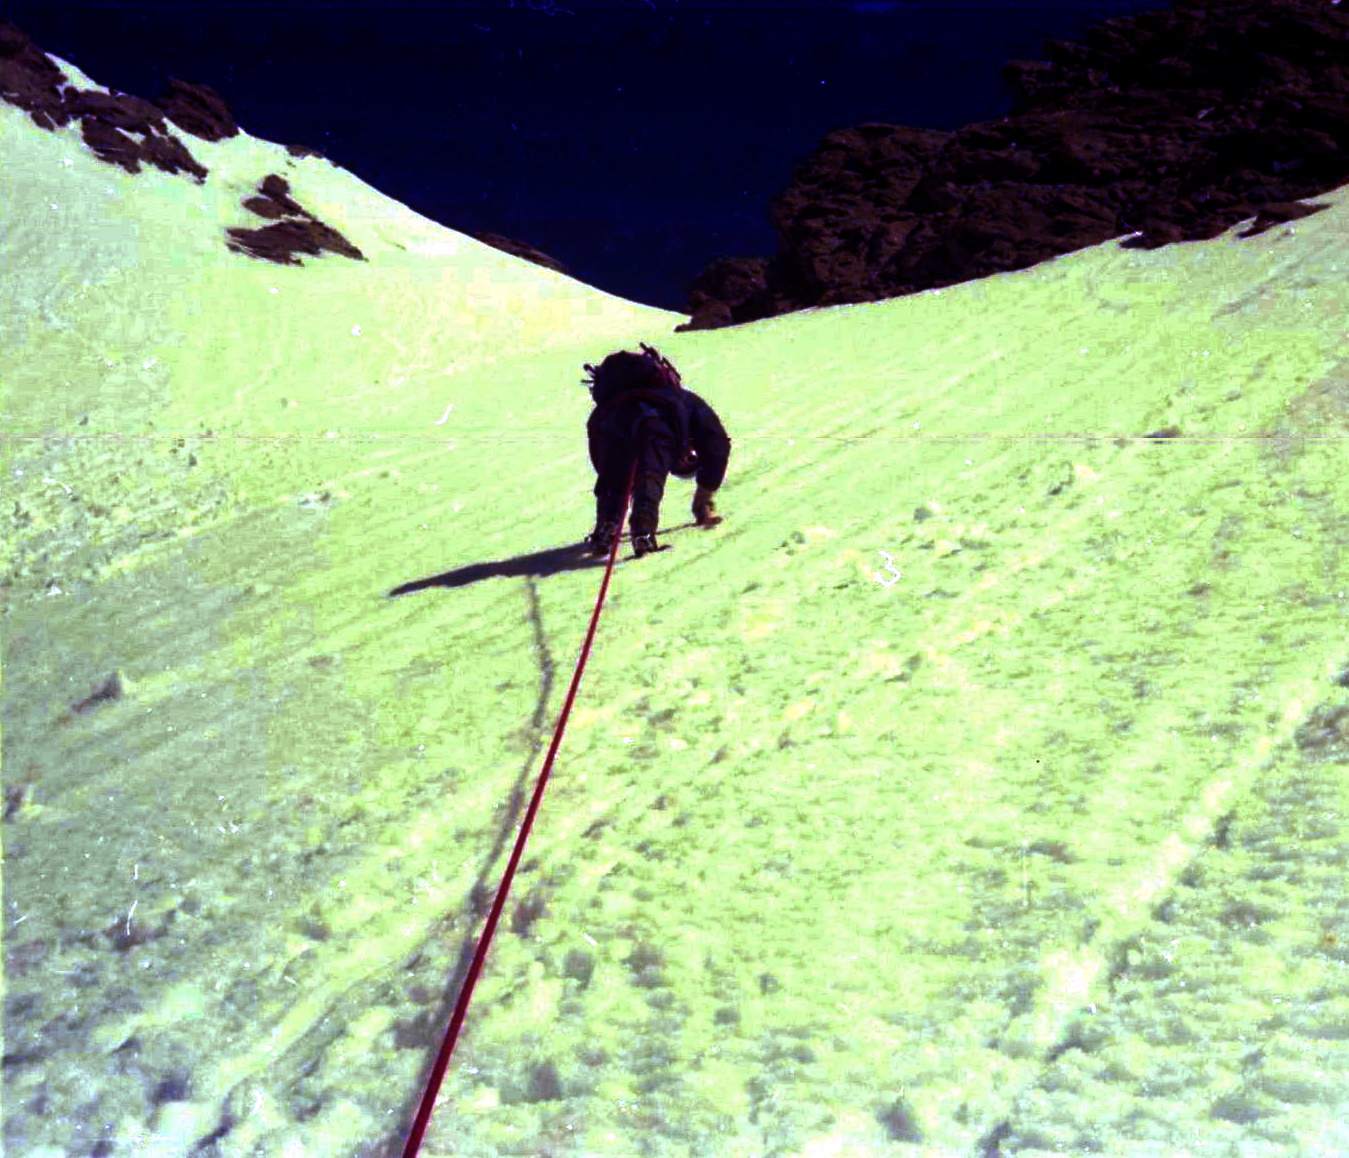 Climbing snow slopes to the Schrecksattel on the ascent of the Schreckhorn in the Bernese Oberland of Switzerland